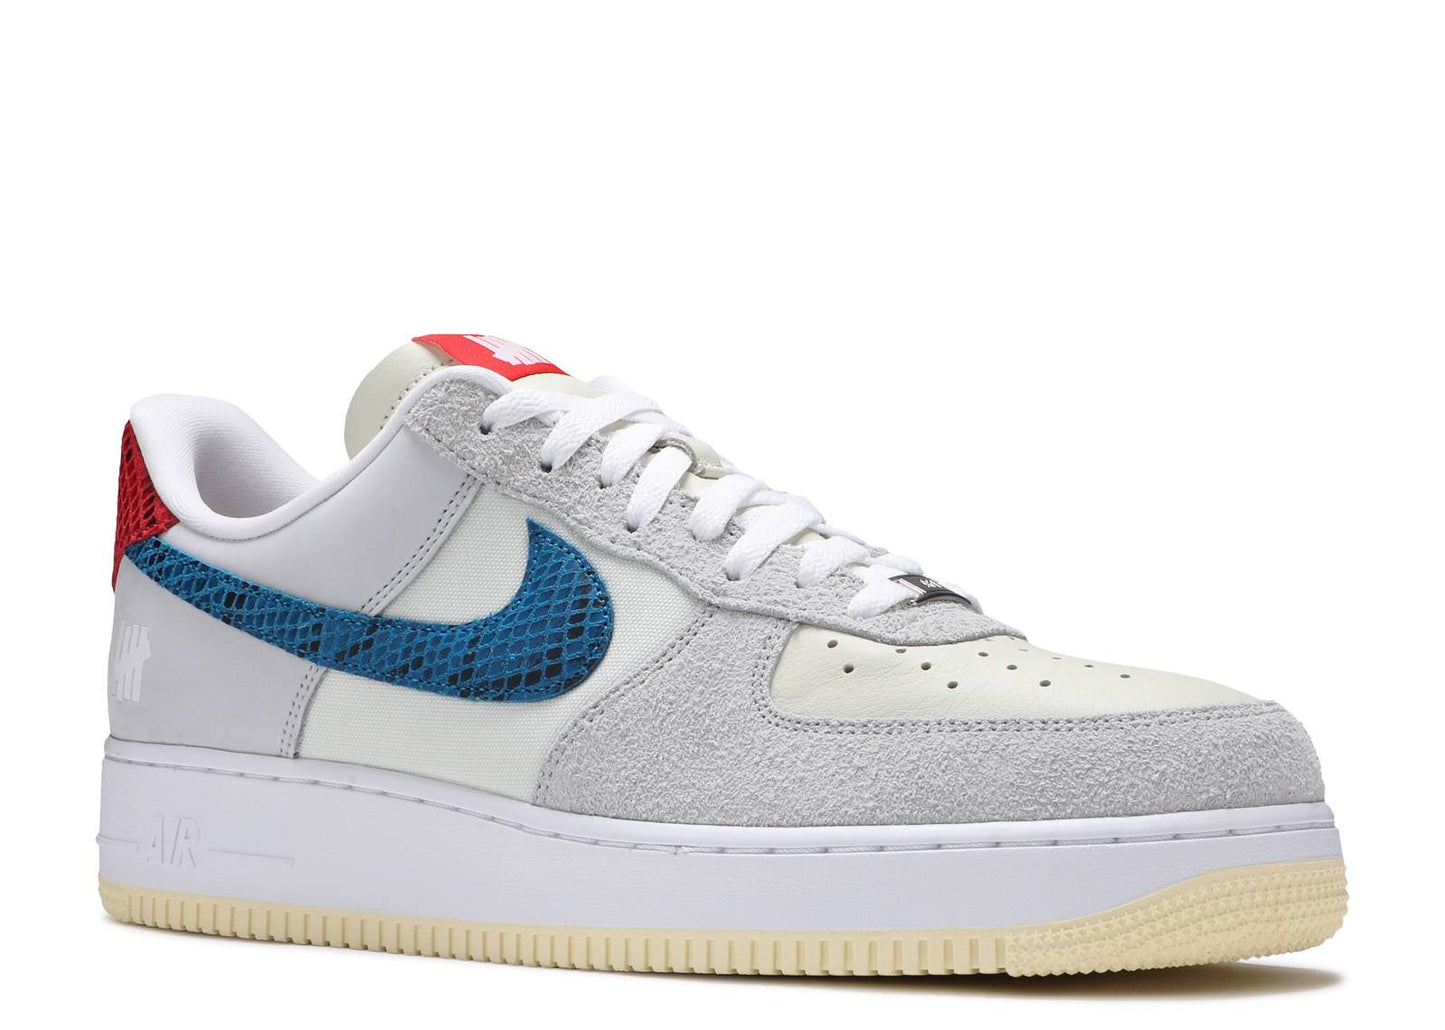 Undefeated x Nike Air Force 1 Low "5 On It White"